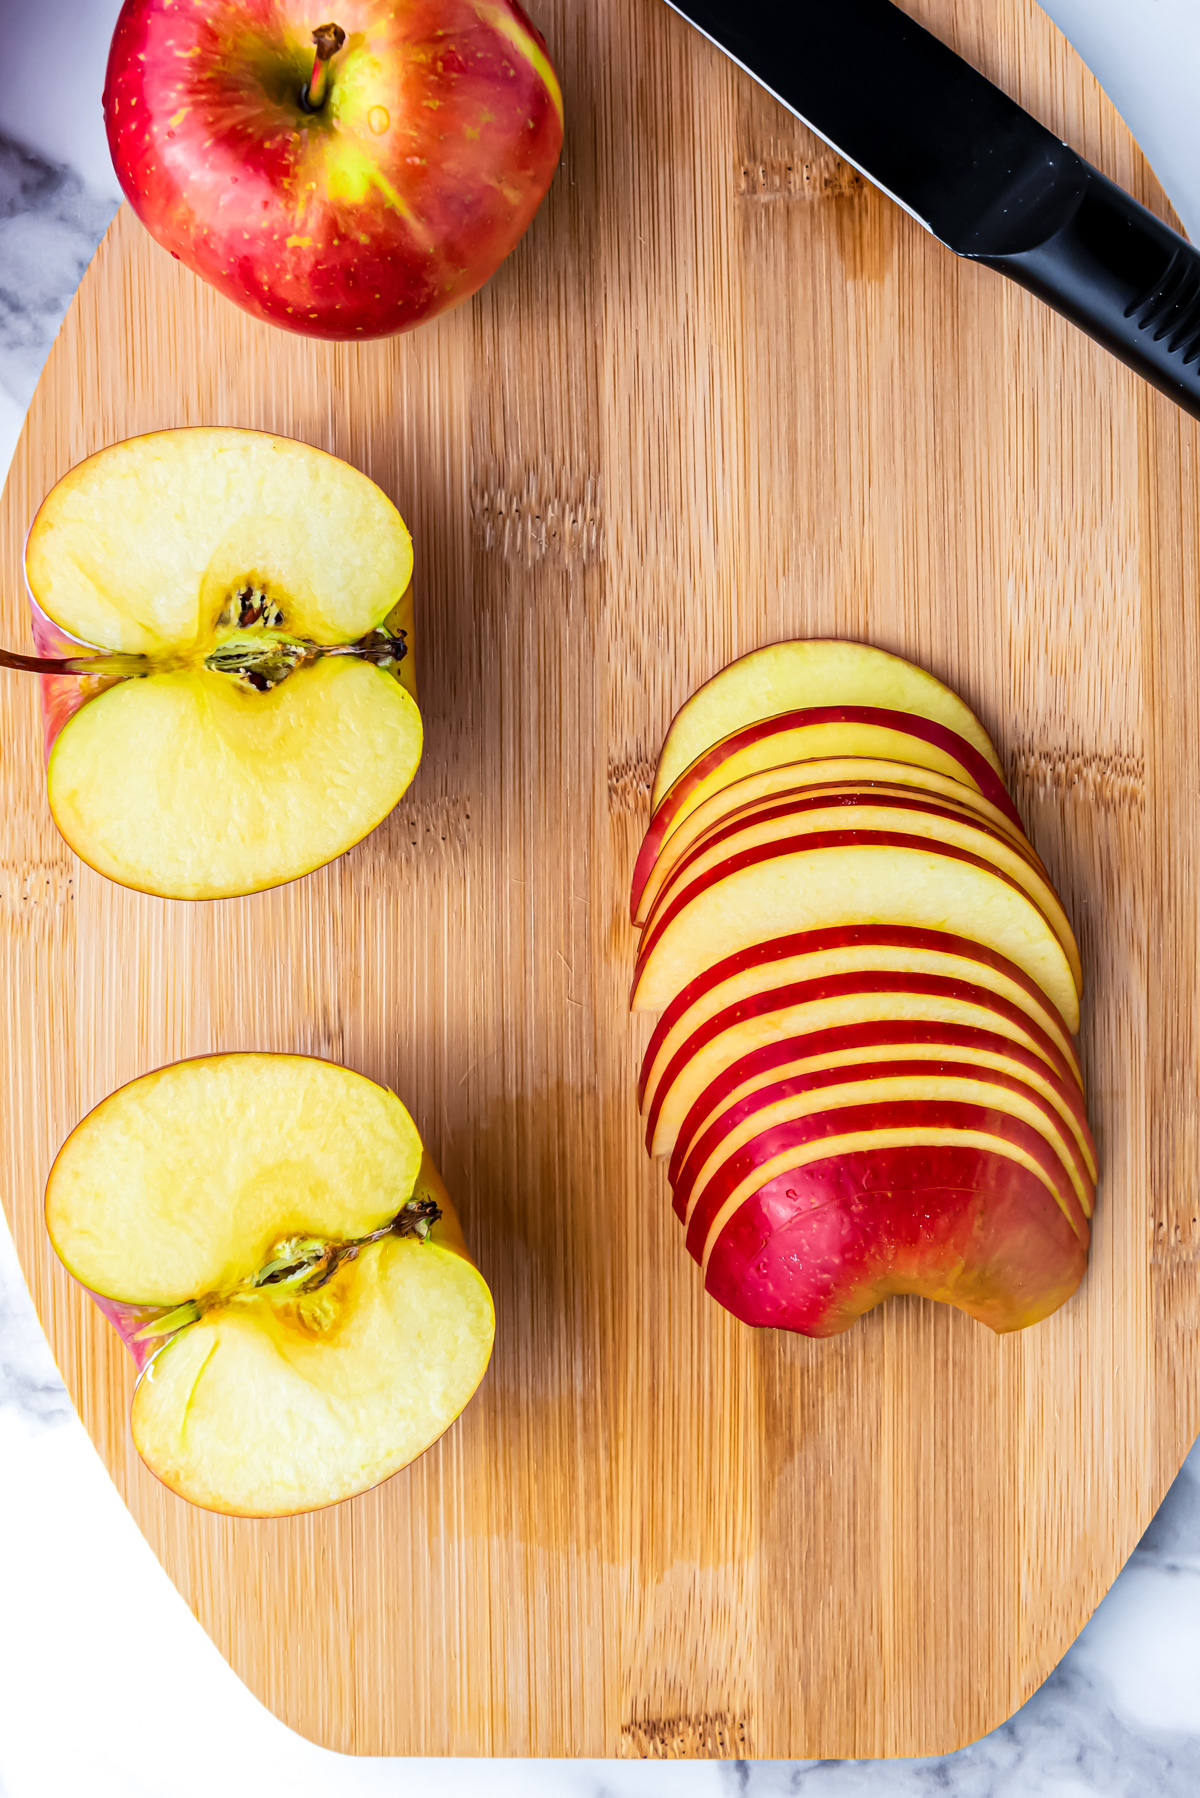 Three apples on a wooden cutting board - 1 whole, 1 cut in half, and 1 cut into very thin slices.